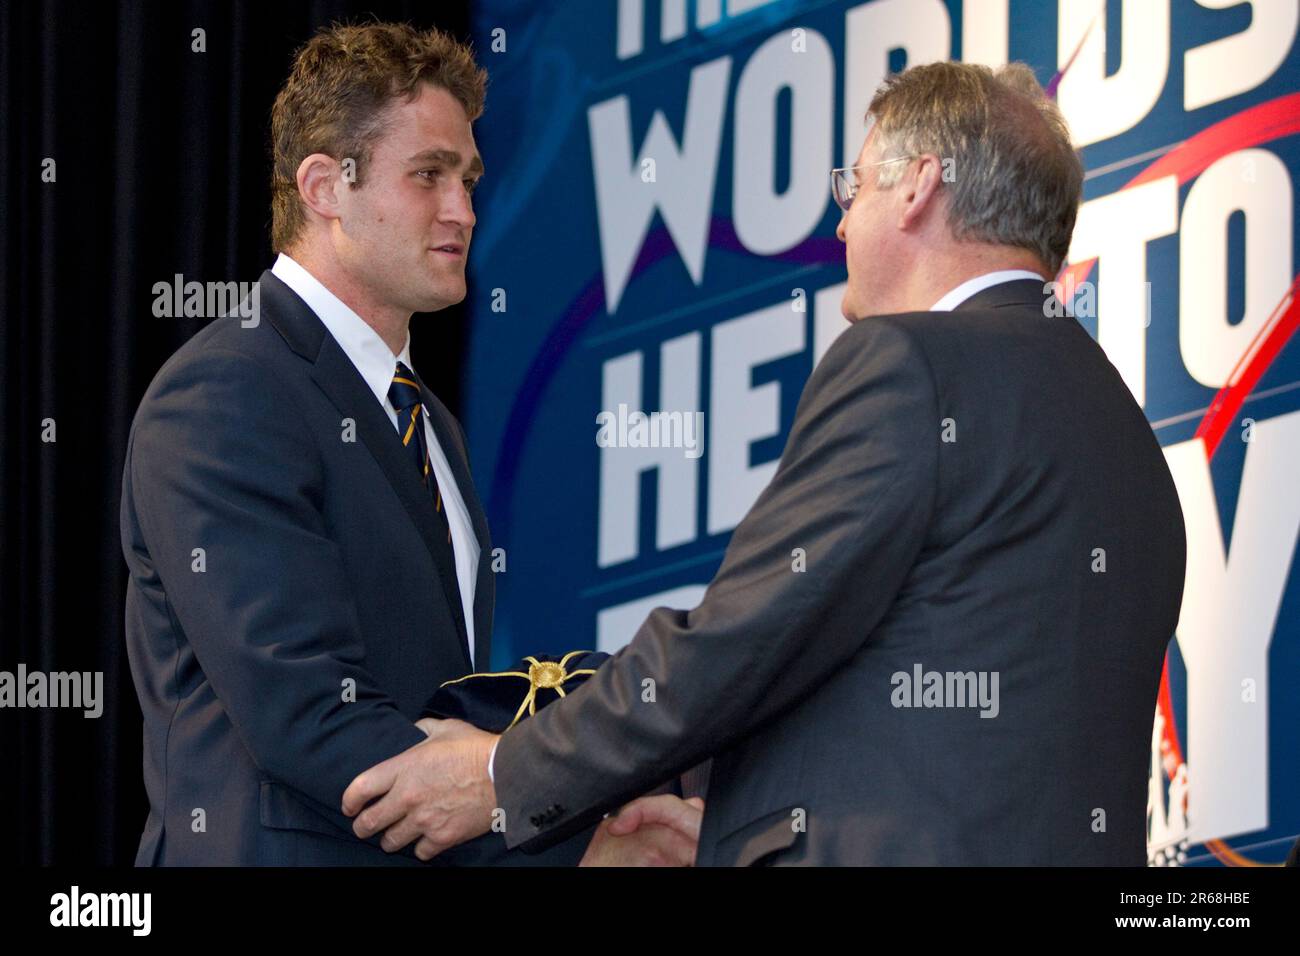 Team Captain James Horwill receives his tournament cap from IRB Chairman Bernard Lapasset at Australia's Rugby World Cup Team official welcome, Aotea Square, Auckland, New Zealand, Tuesday, September 06, 2011. Stock Photo